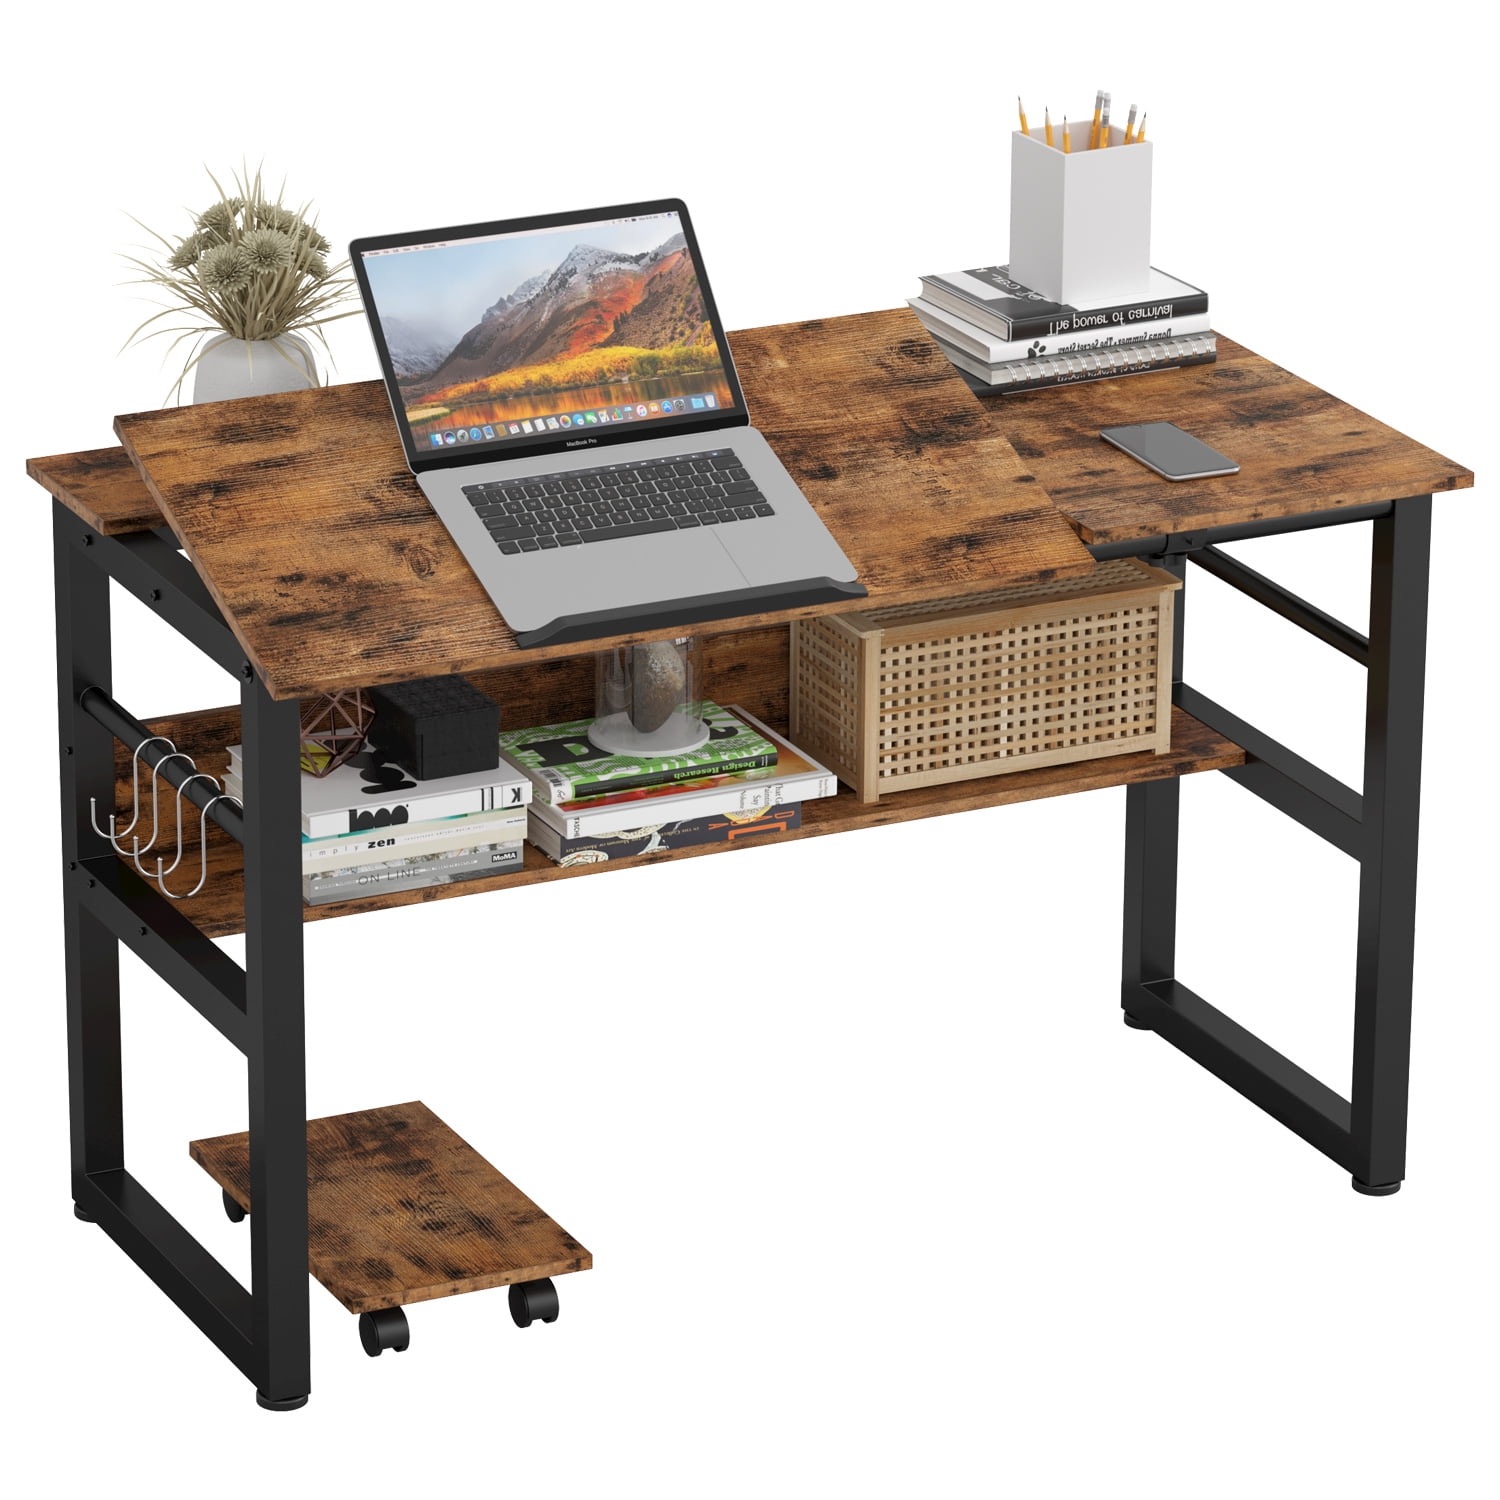 Industrial Style Writing Study Table for Home Office Vintage Brown 47 Office Desk with 0.7 Thicker Tabletop IRONCK Computer Desk Simple Study Table 1.6 Sturdy Metal Frame 